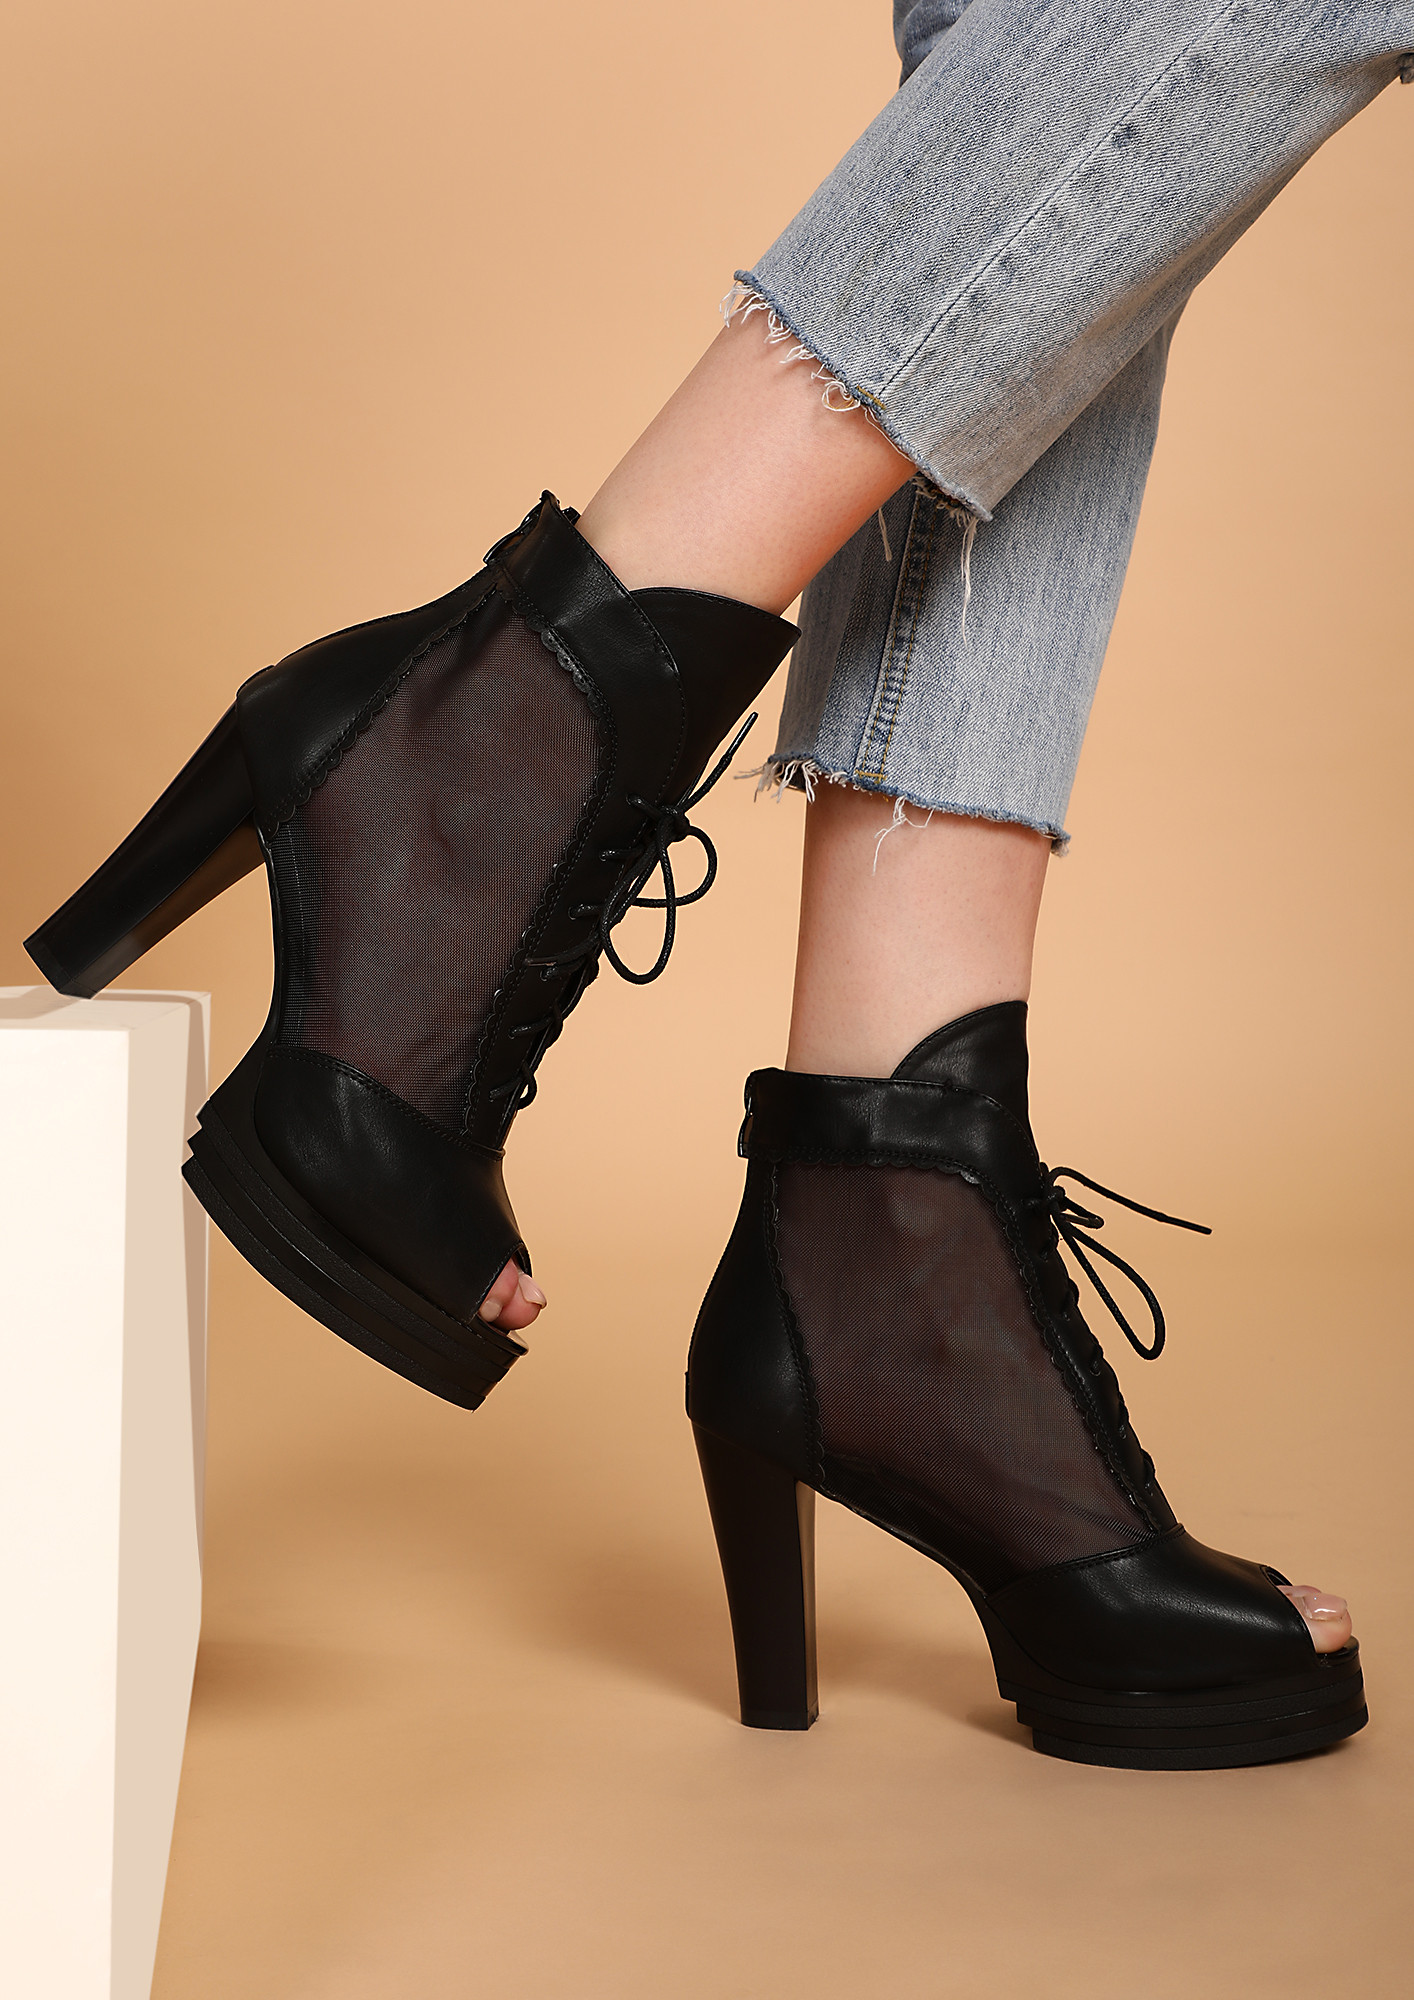 IN A HAPPY MOOD BLACK HEELED SHOES